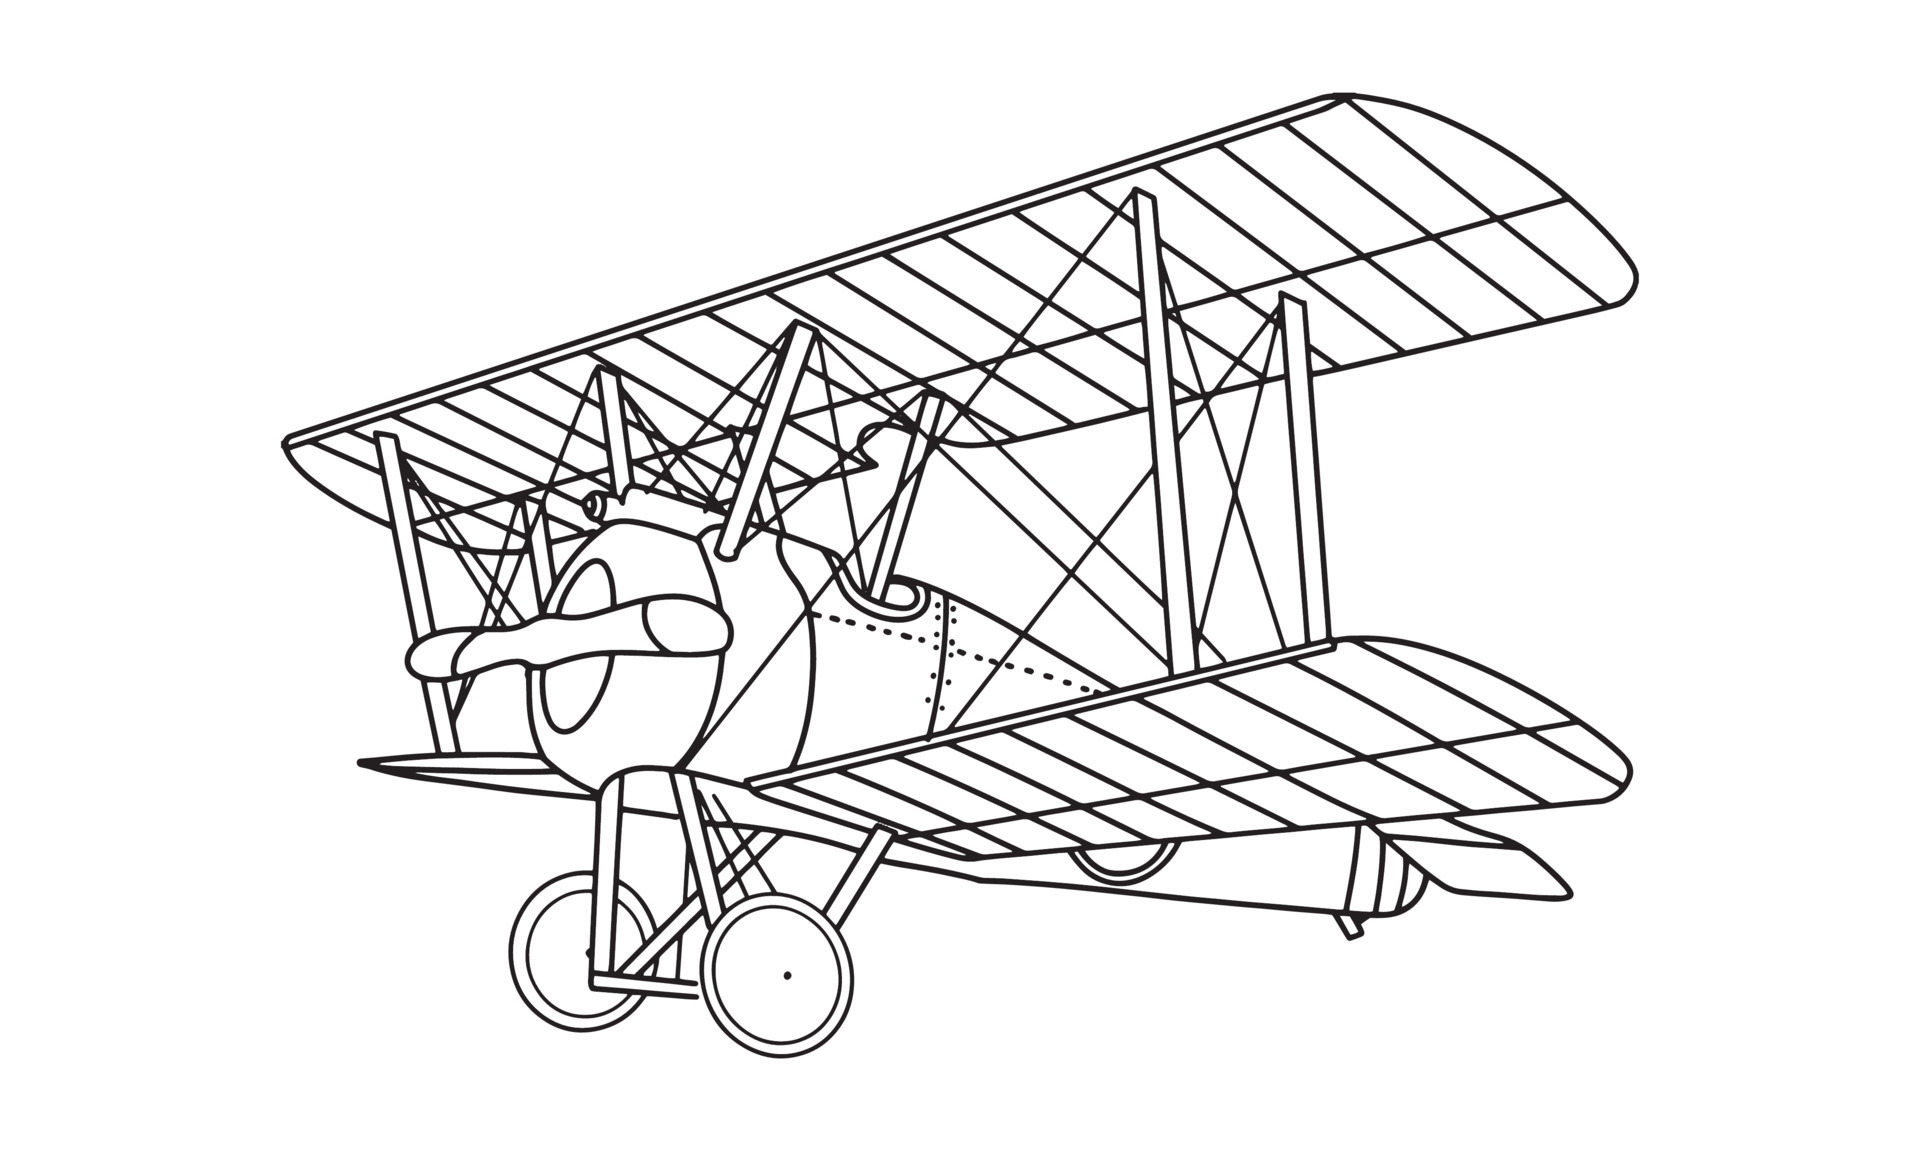 9800 Airplane Sketch Stock Photos Pictures  RoyaltyFree Images  iStock